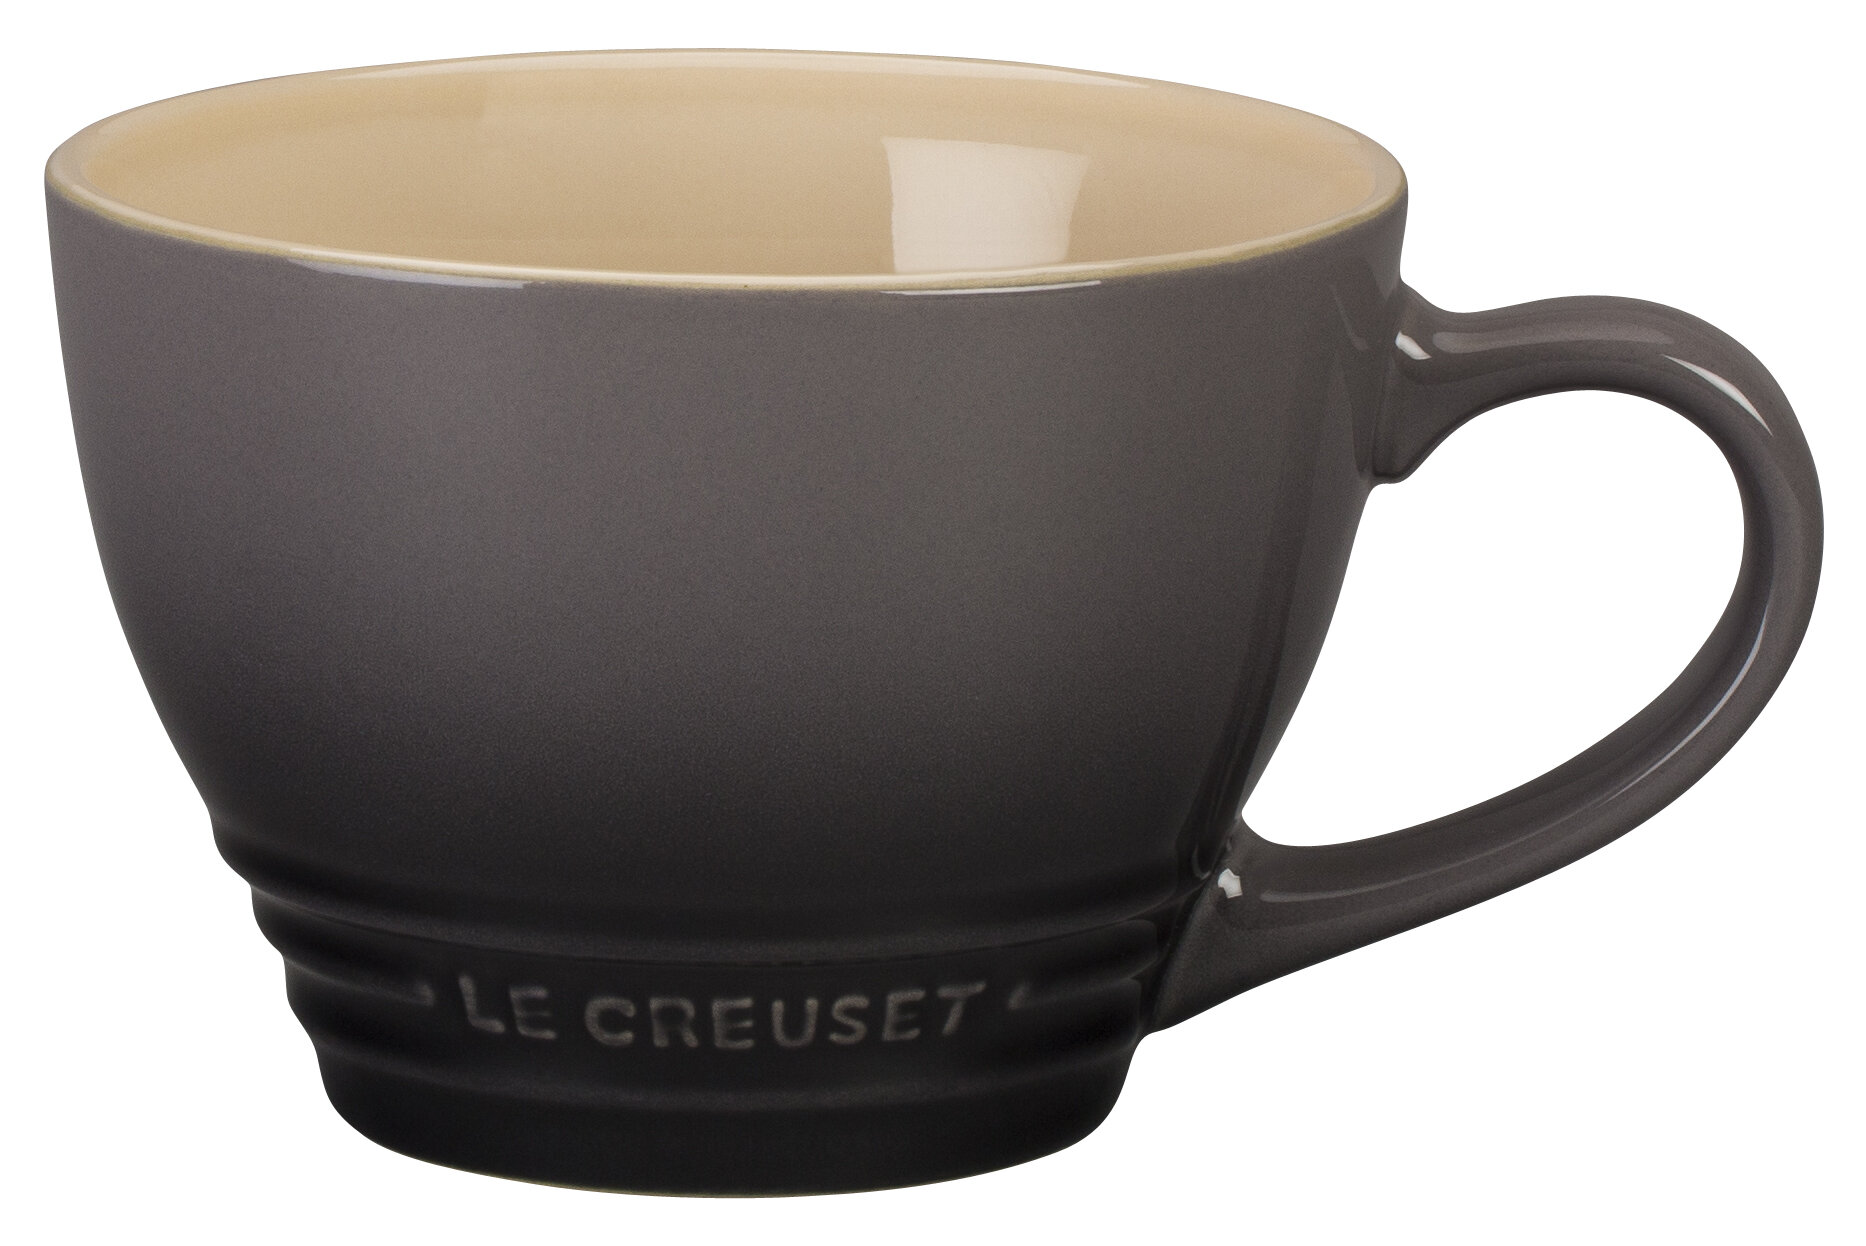 Le Creuset 7 oz. each Set of 2 Cappuccino Cups and Saucers - White